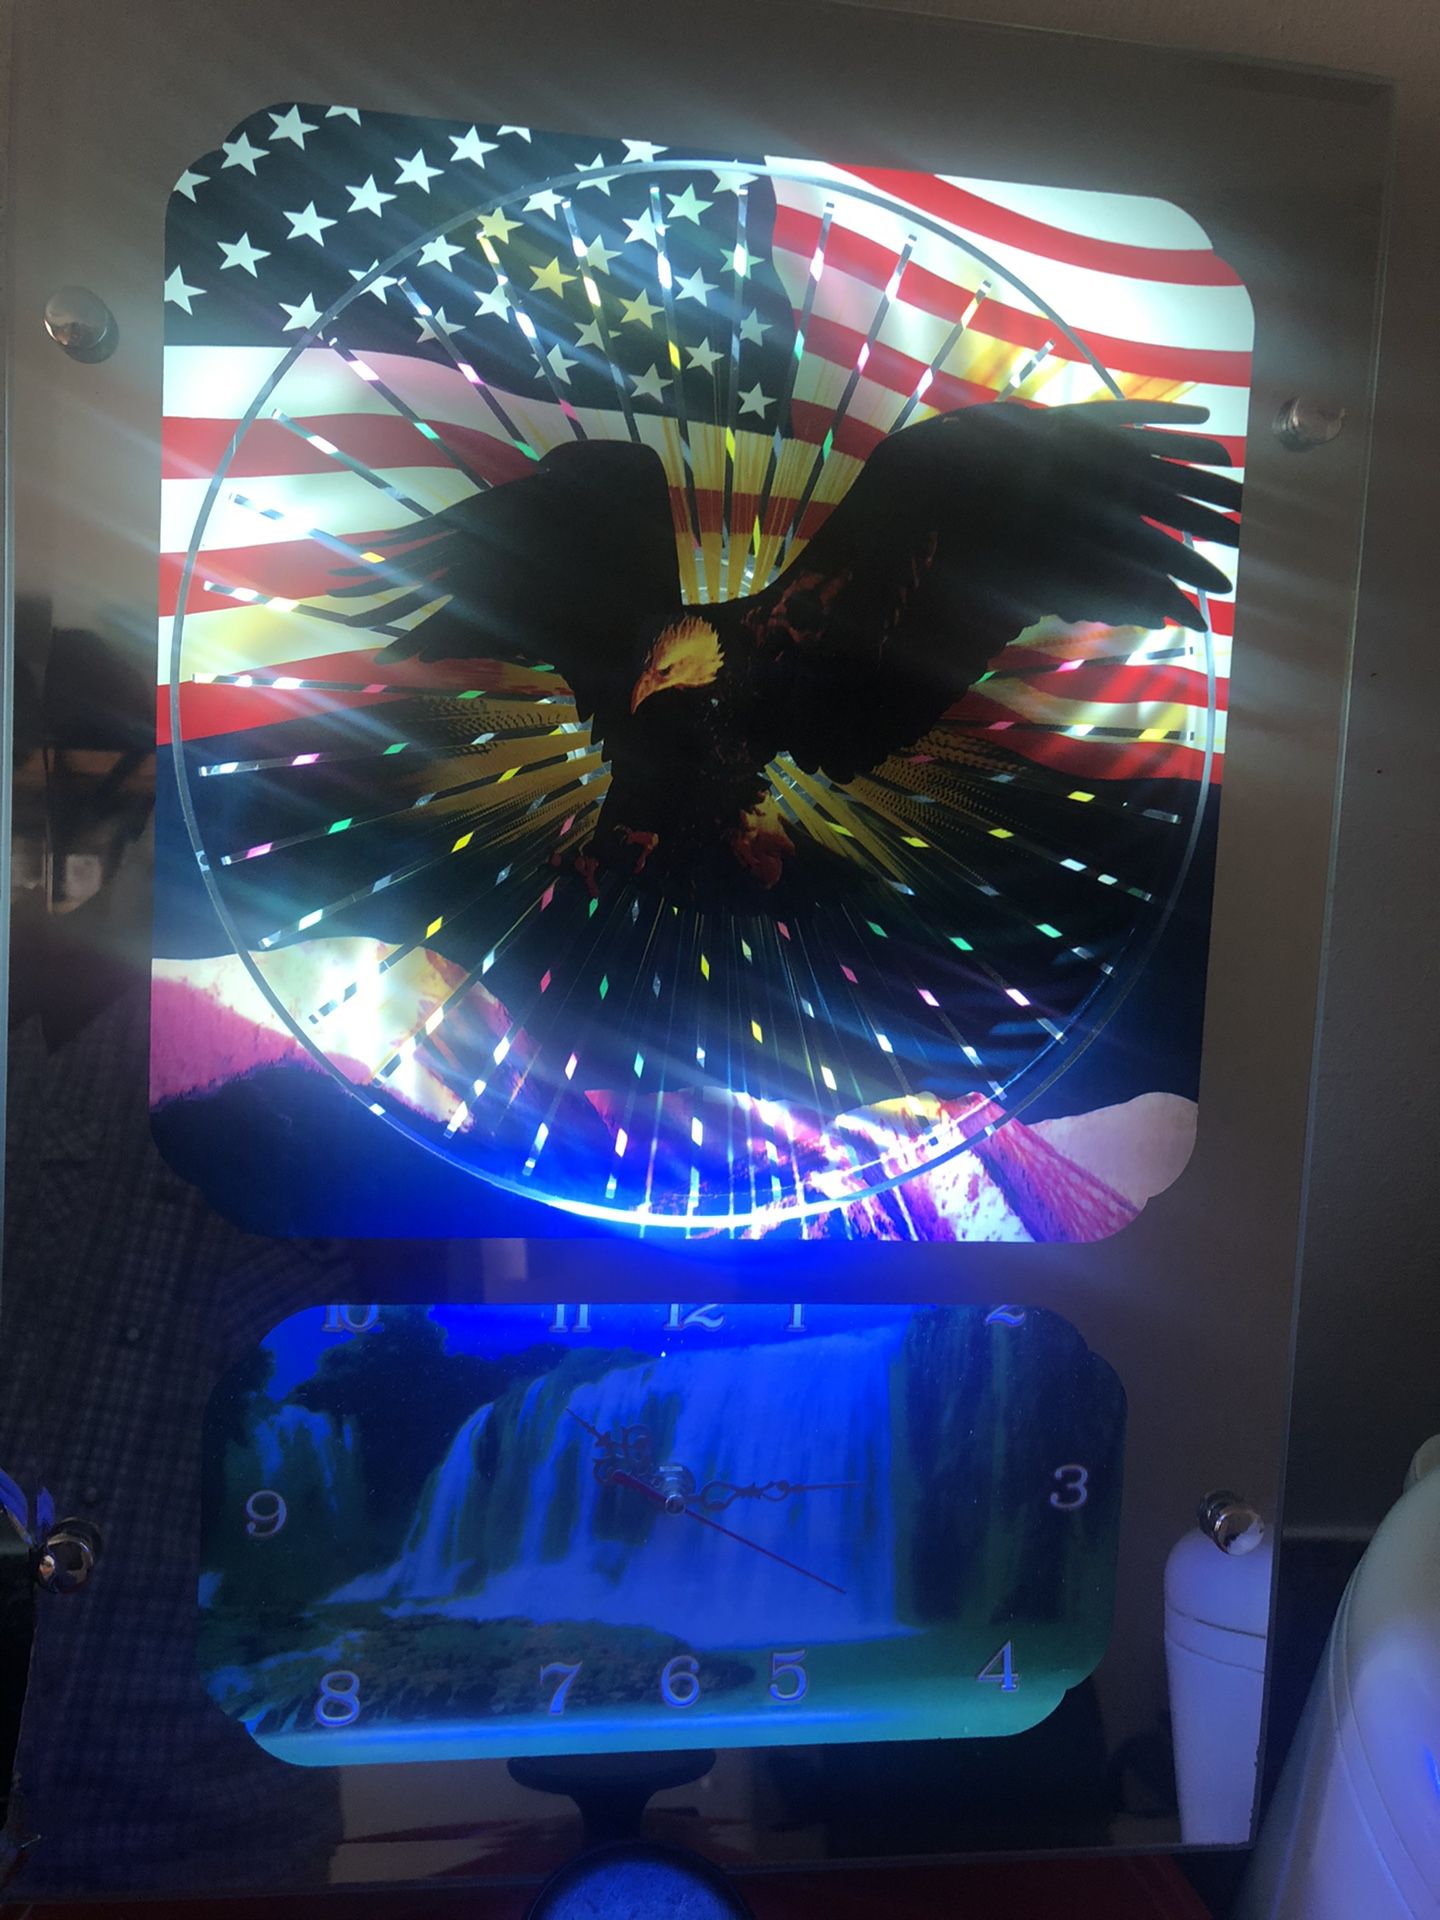 Wall watch with nice great falls snd American eagles 🦅 flag with the light flashing beautiful decor made from glass , small cracked in left bottom